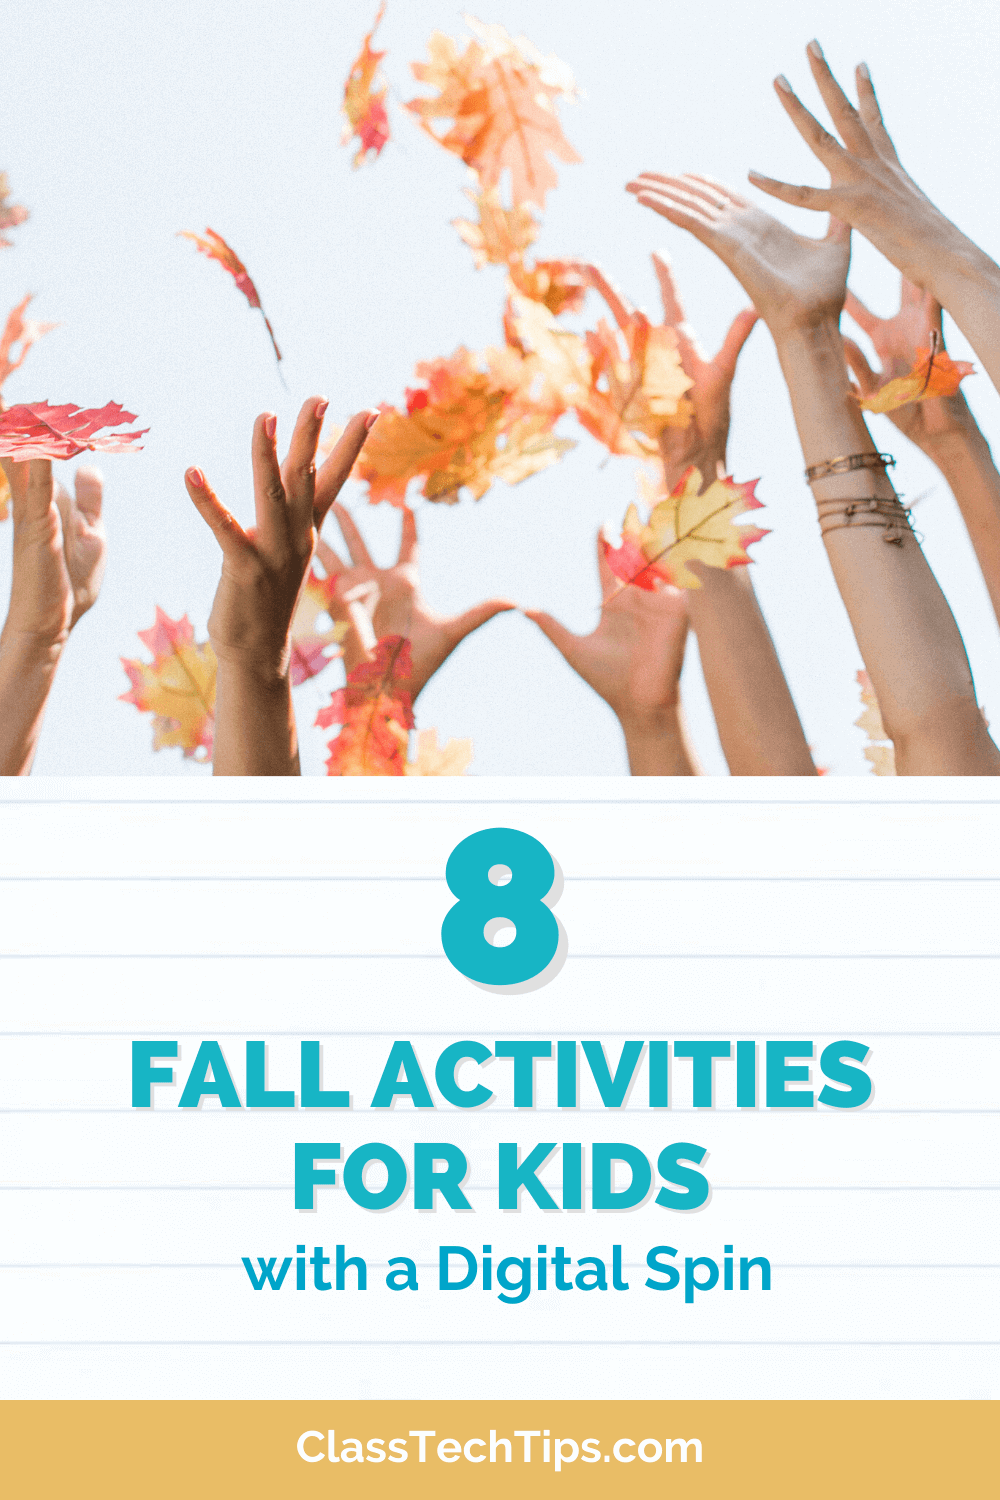 Hands joyfully throwing autumn leaves into the air, representing the blend of digital and traditional Fall activities for kids.